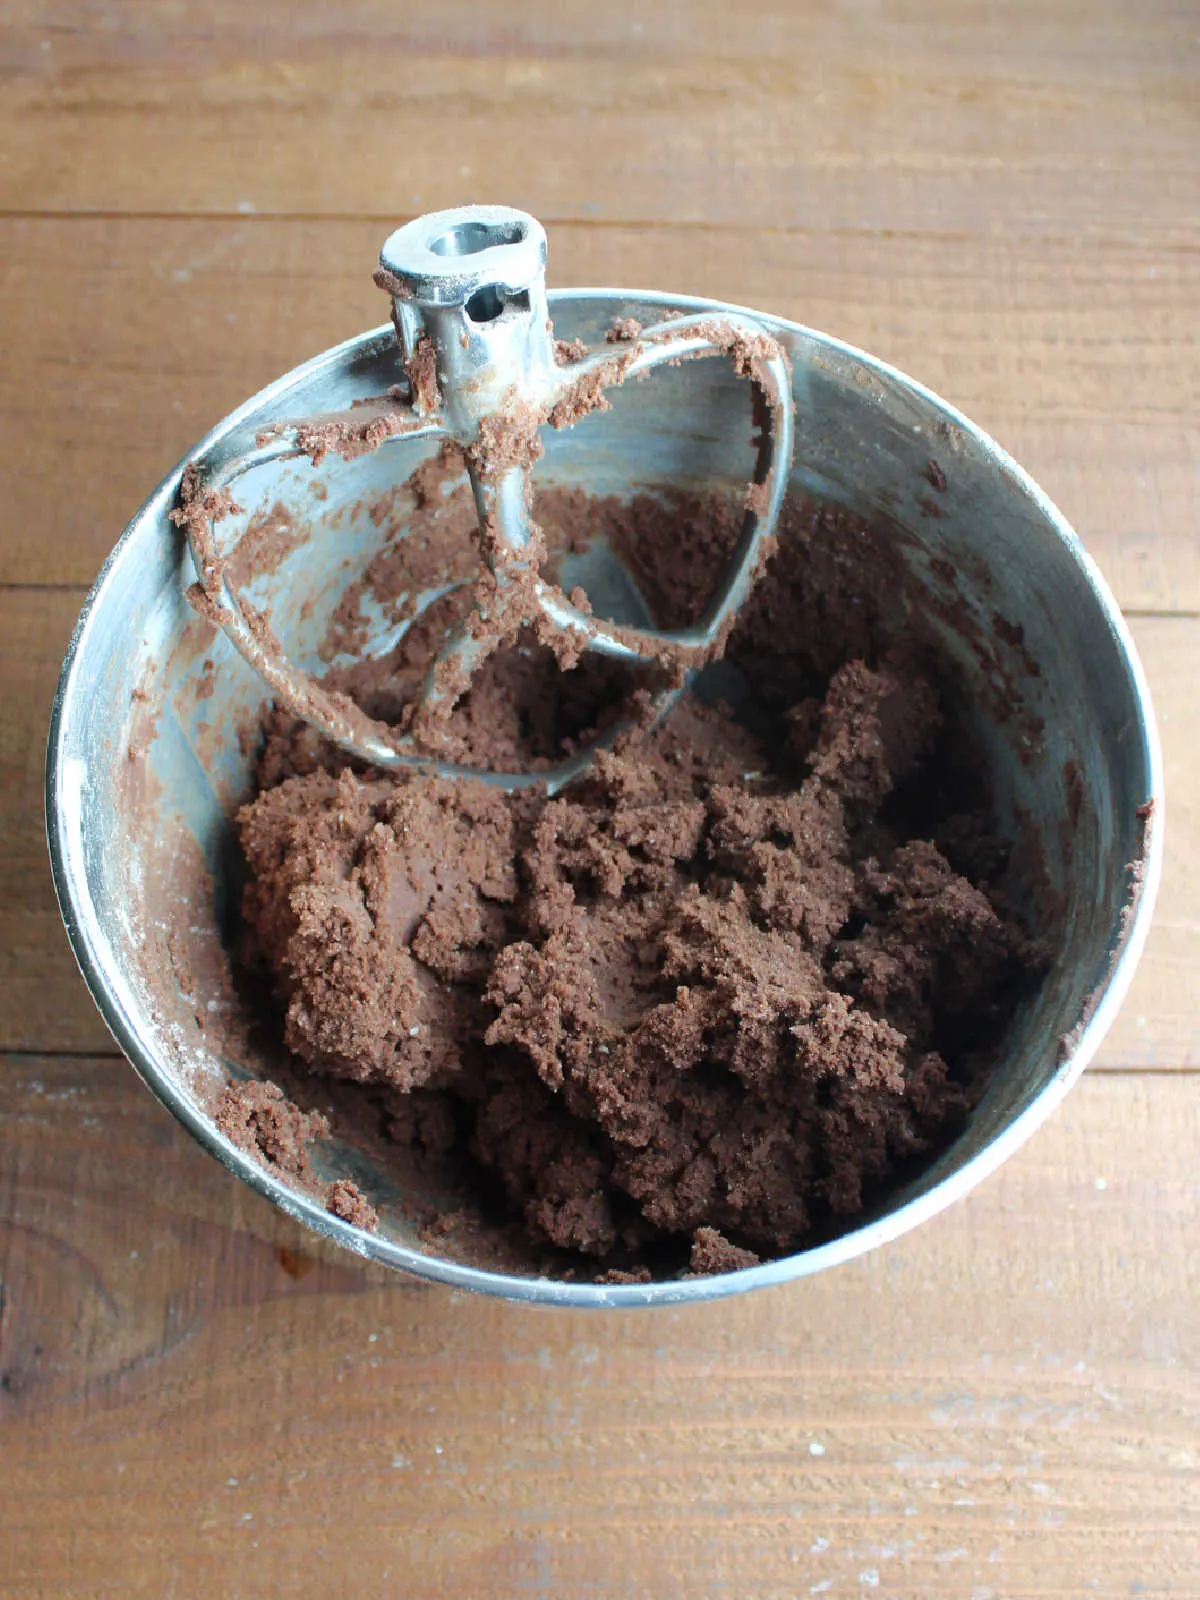 Mixer bowl with soft chocolate cookie dough ready to be scooped.